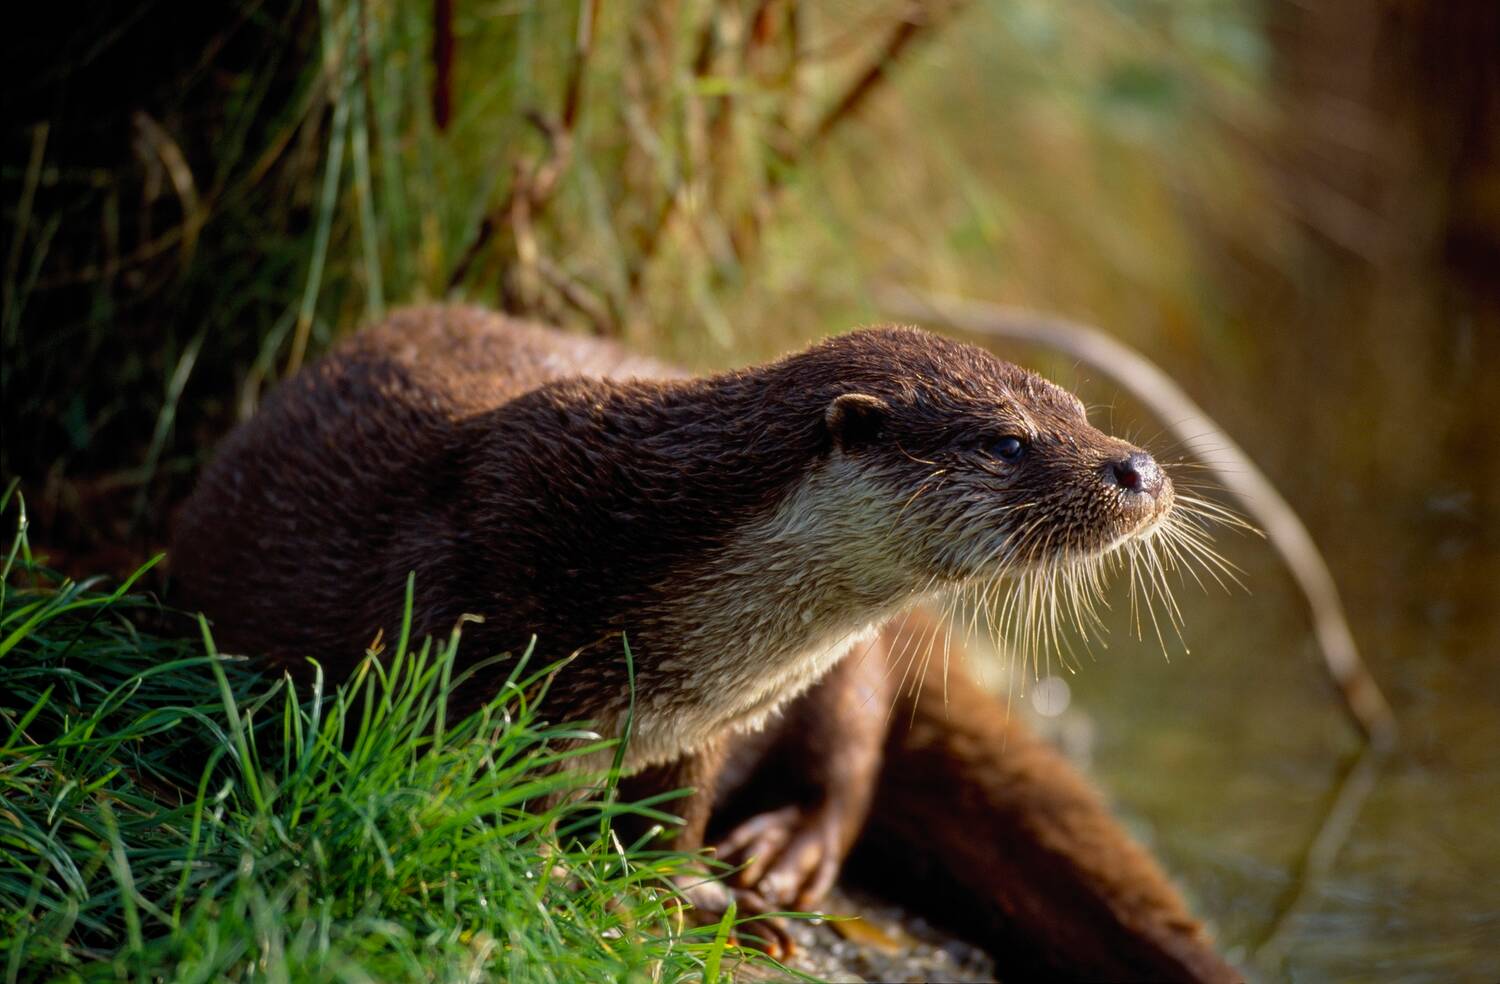 An otter sits on a grassy river bank, facing the camera so we can see its long whiskers. It has brown fur with a pale throat.